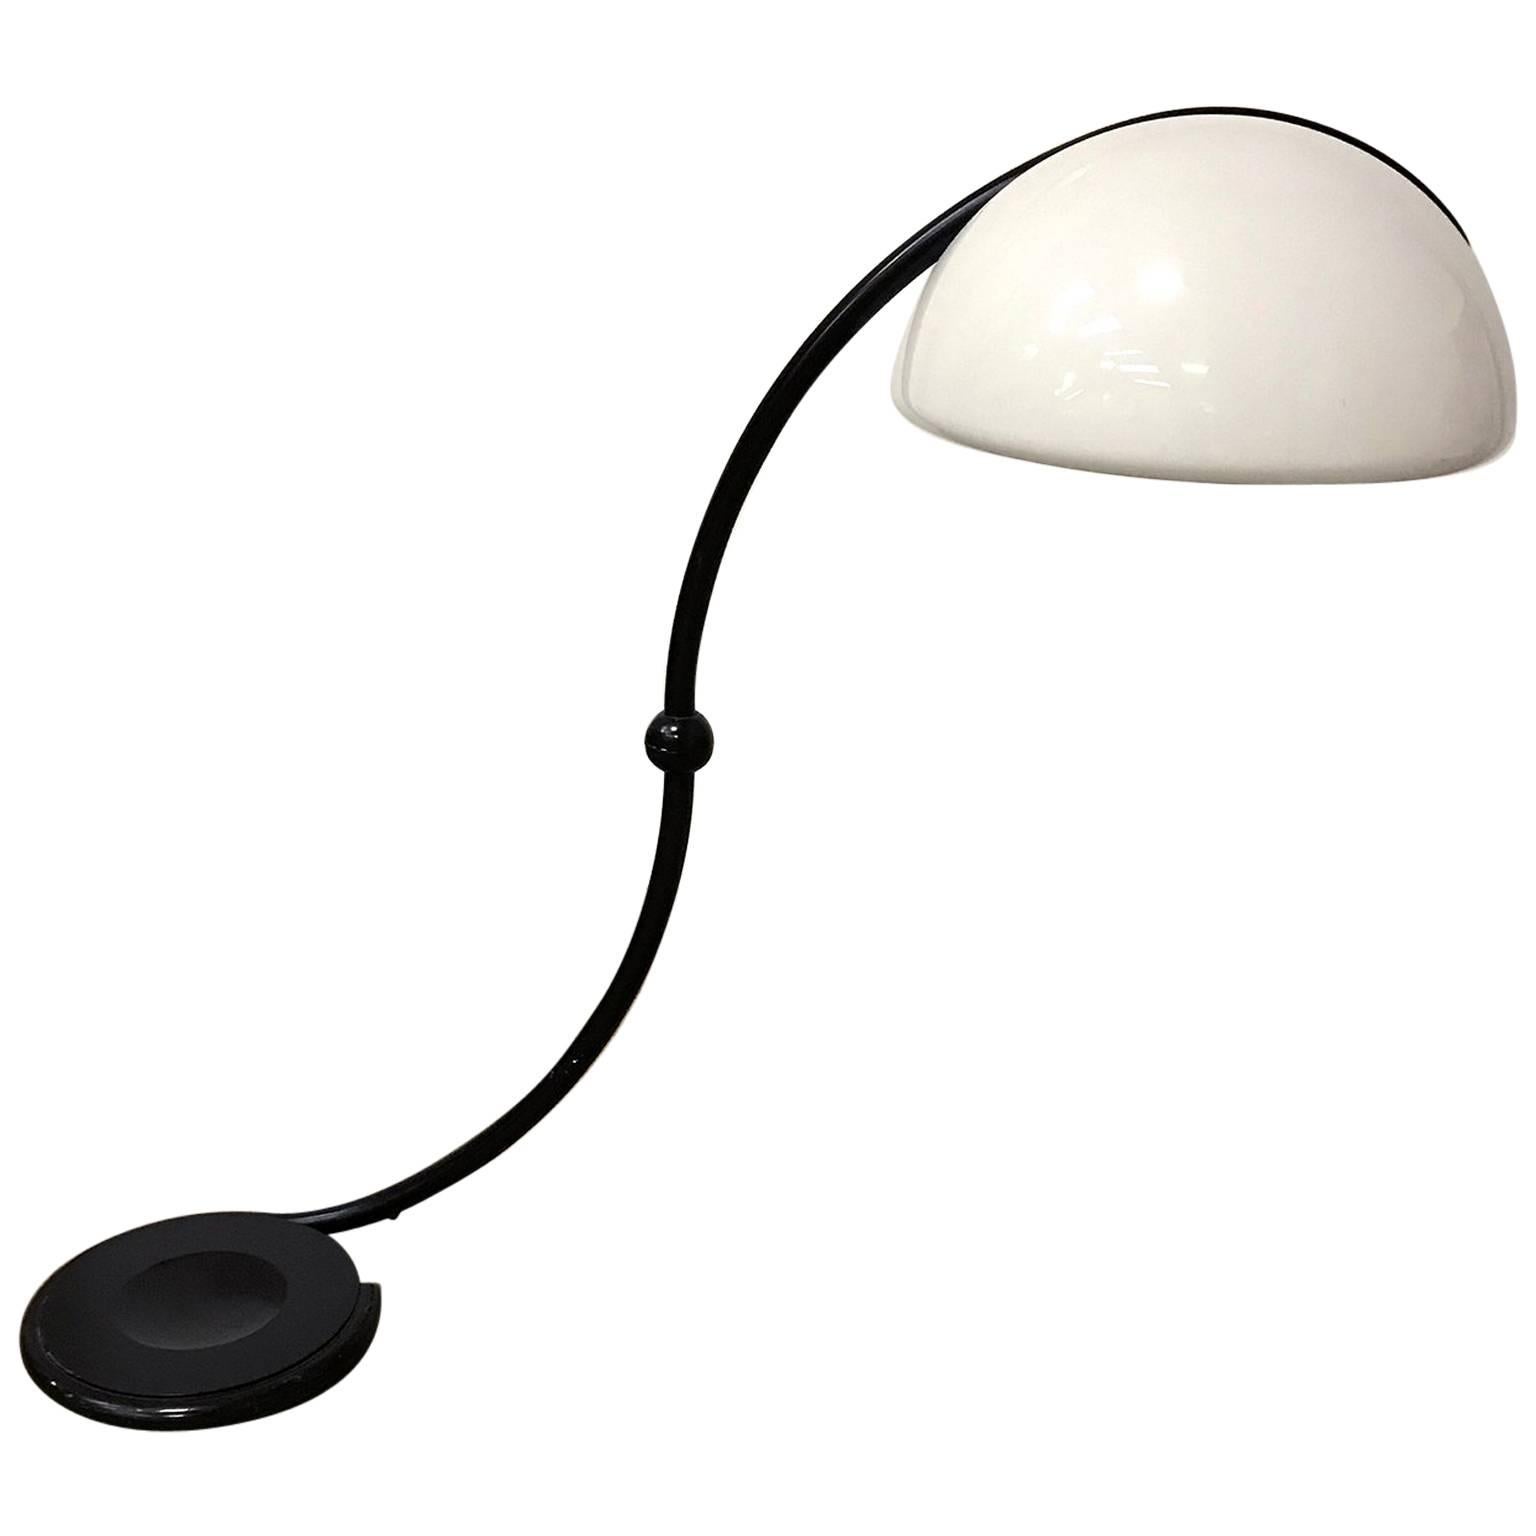 1965, Elio Martinelli for Martinelli Luce, Black Based Floor Lamp Plastic Shade For Sale